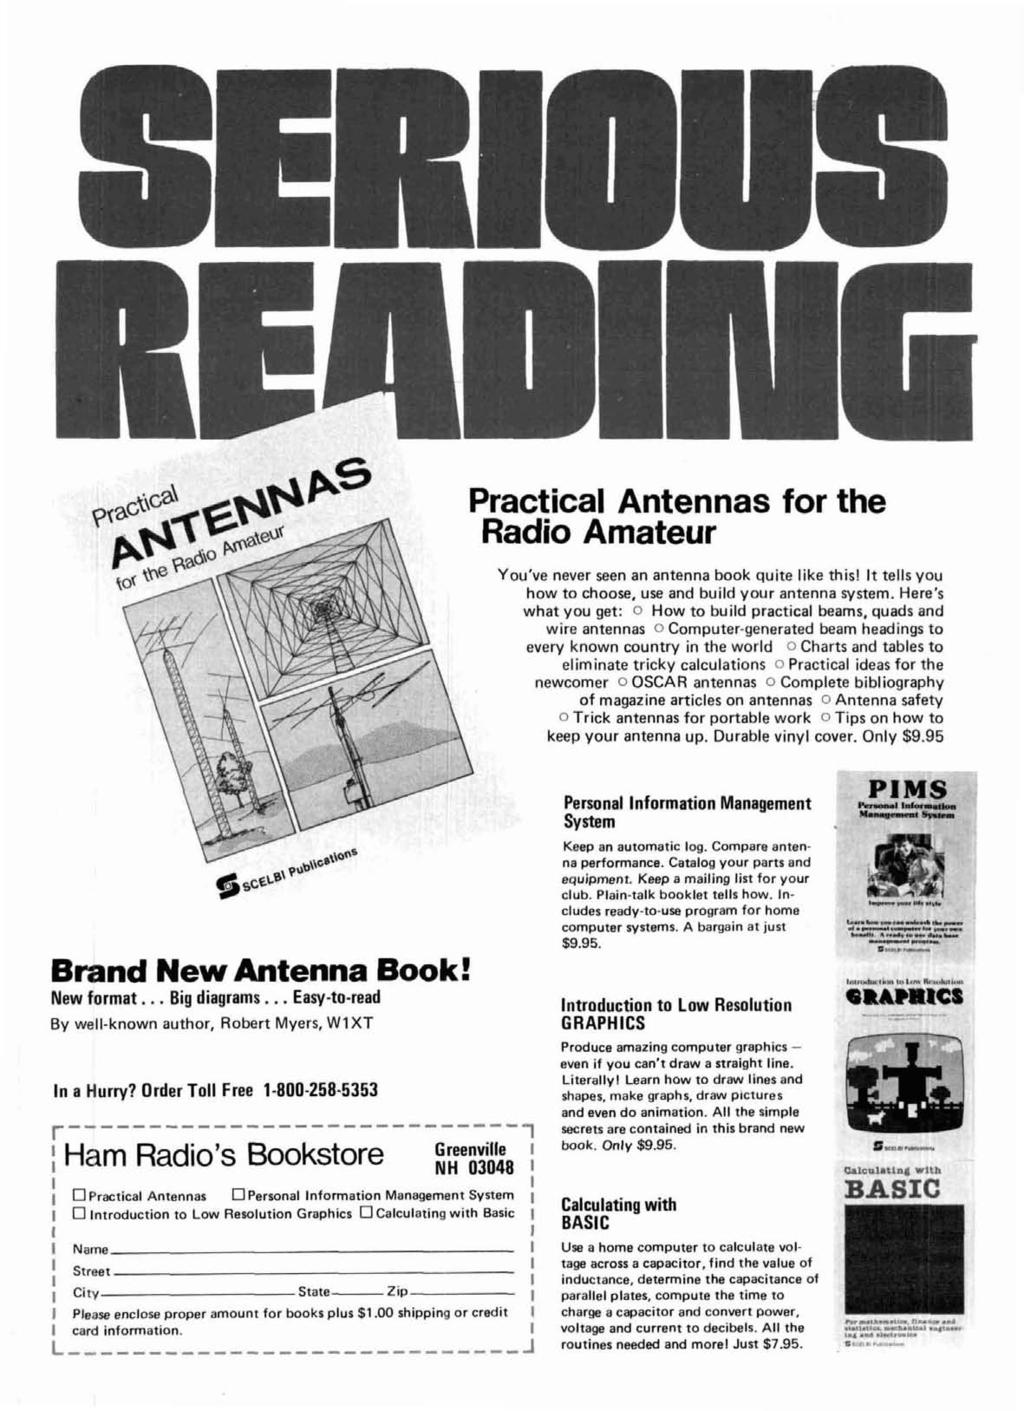 Practical Antennas for the Radio Amateur You've never seen an antenna book quite like thisl It tells you how to choose, use and build your antenna system.